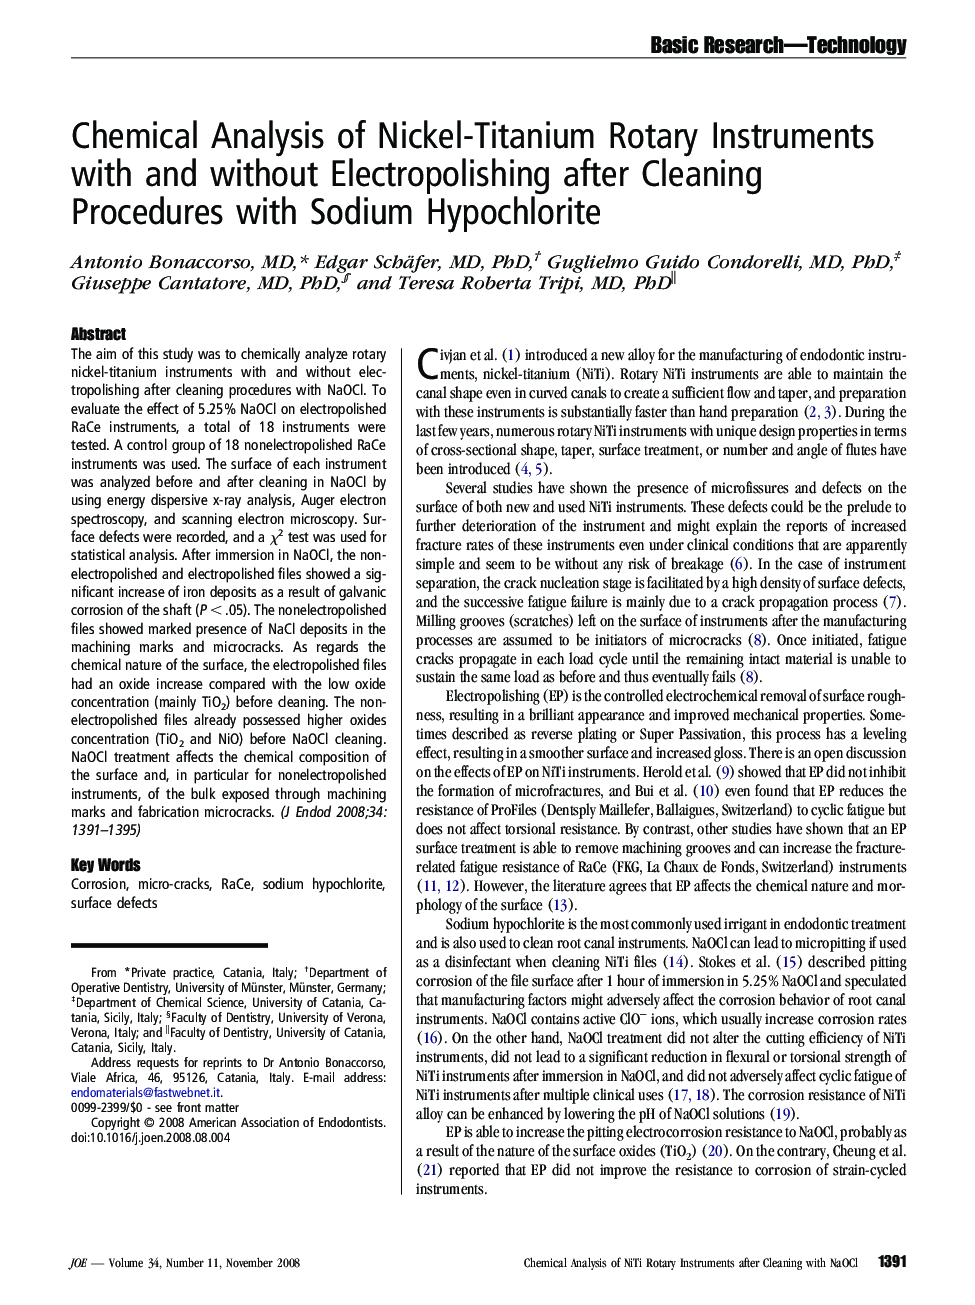 Chemical Analysis of Nickel-Titanium Rotary Instruments with and without Electropolishing after Cleaning Procedures with Sodium Hypochlorite